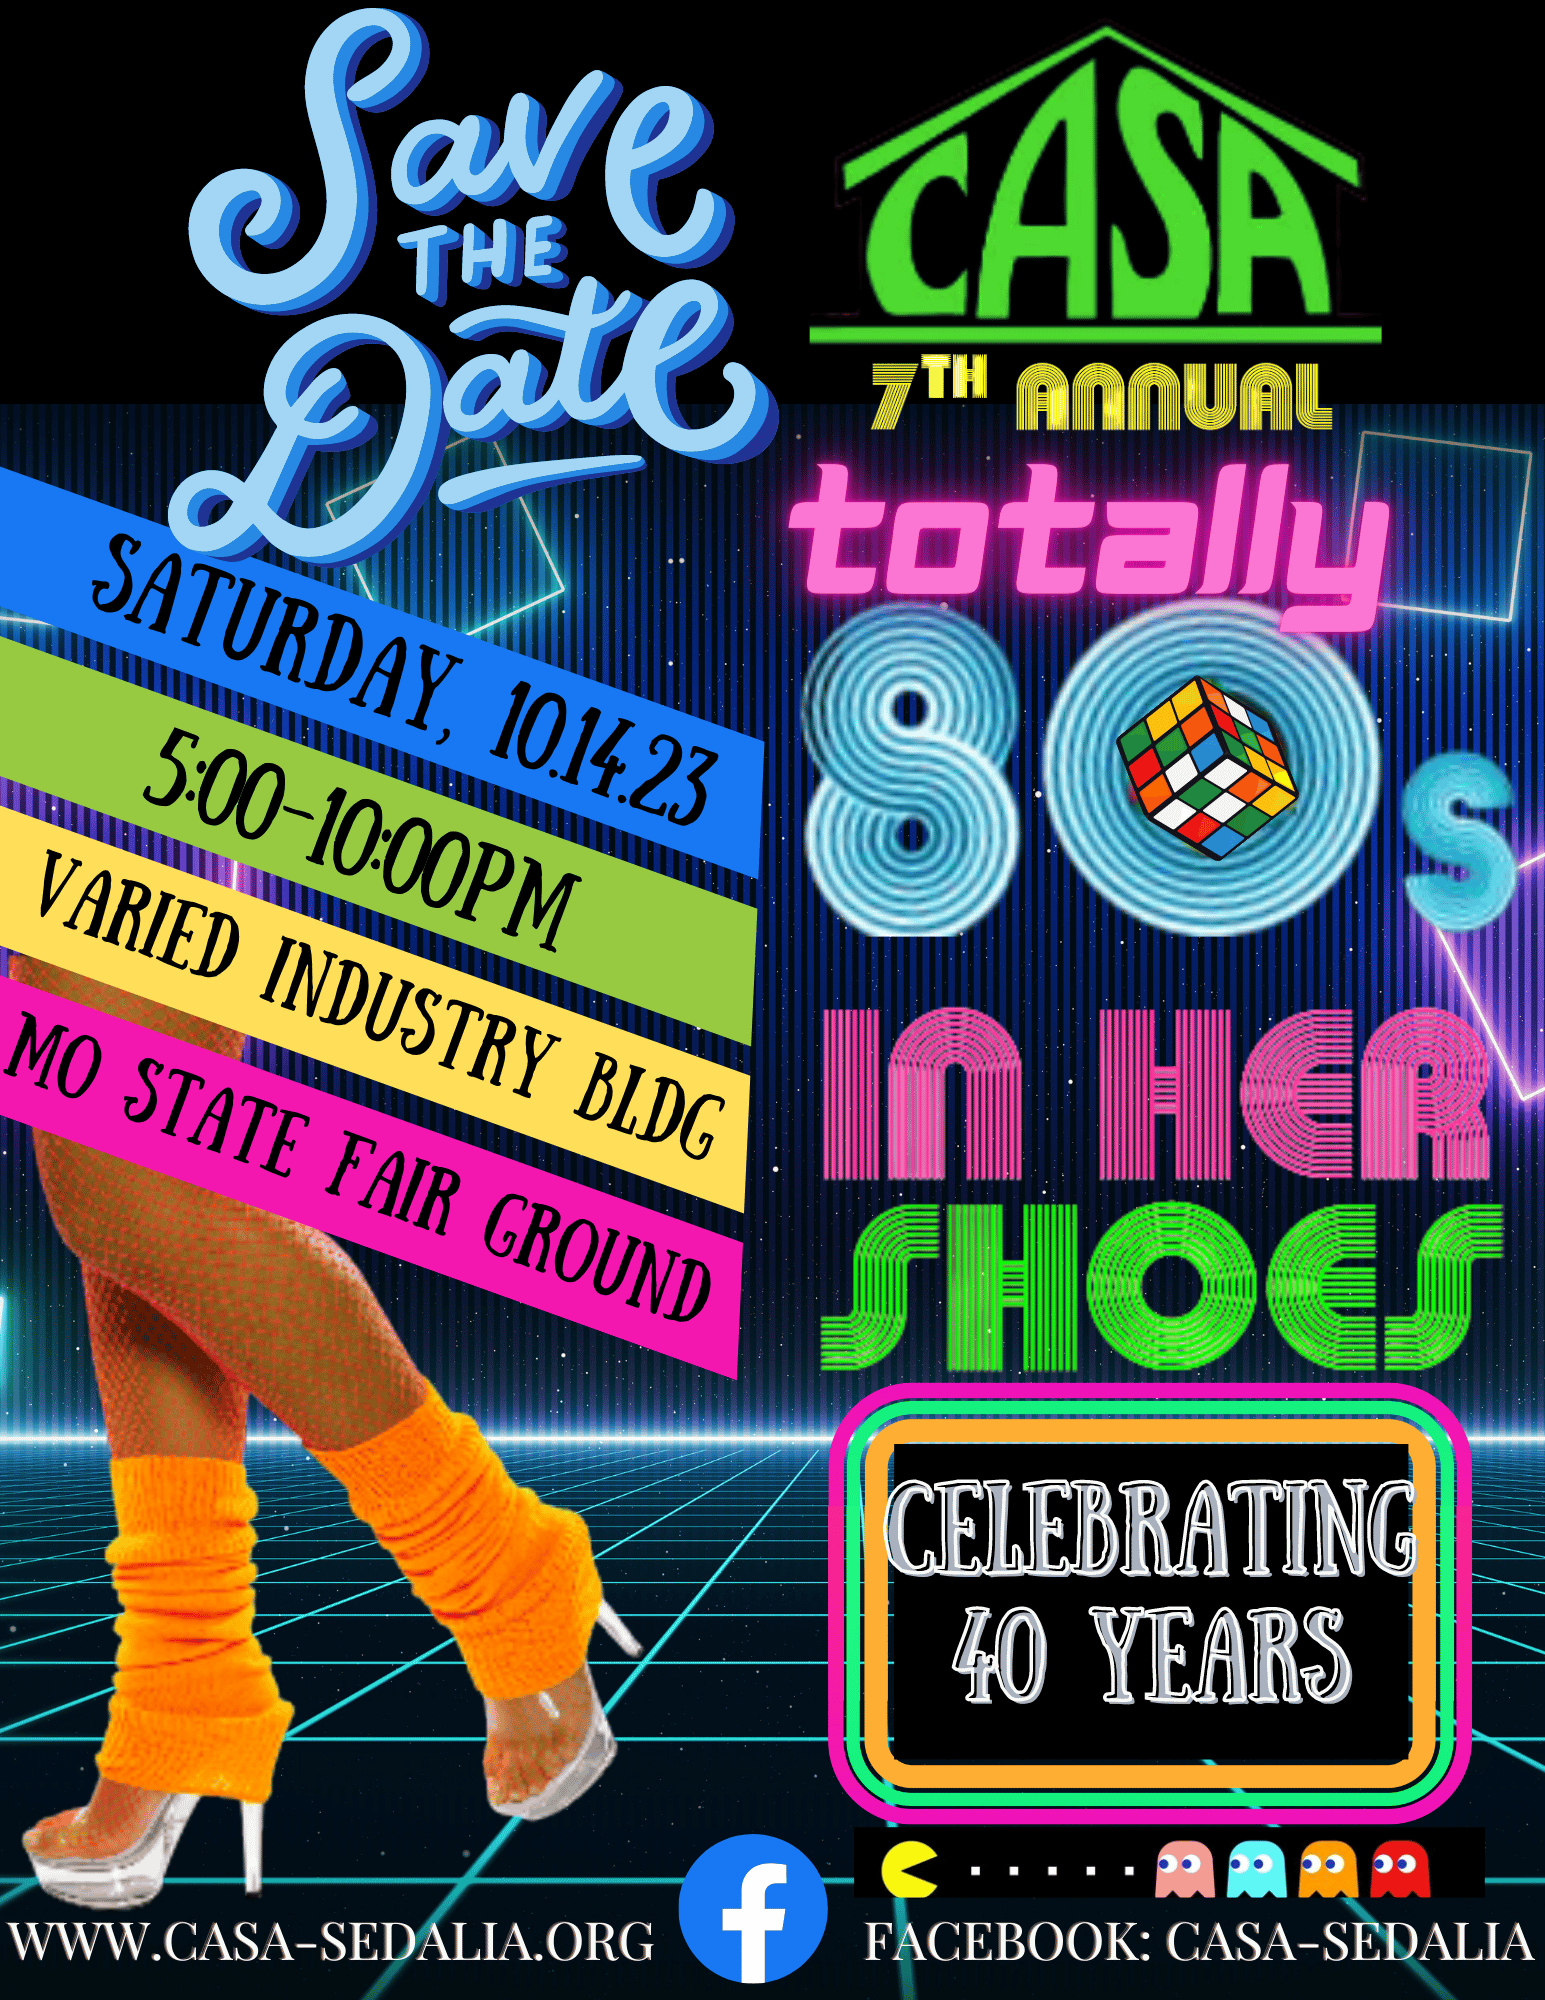 CASAs 7th Annual Totally 80s In Her Shoes pic